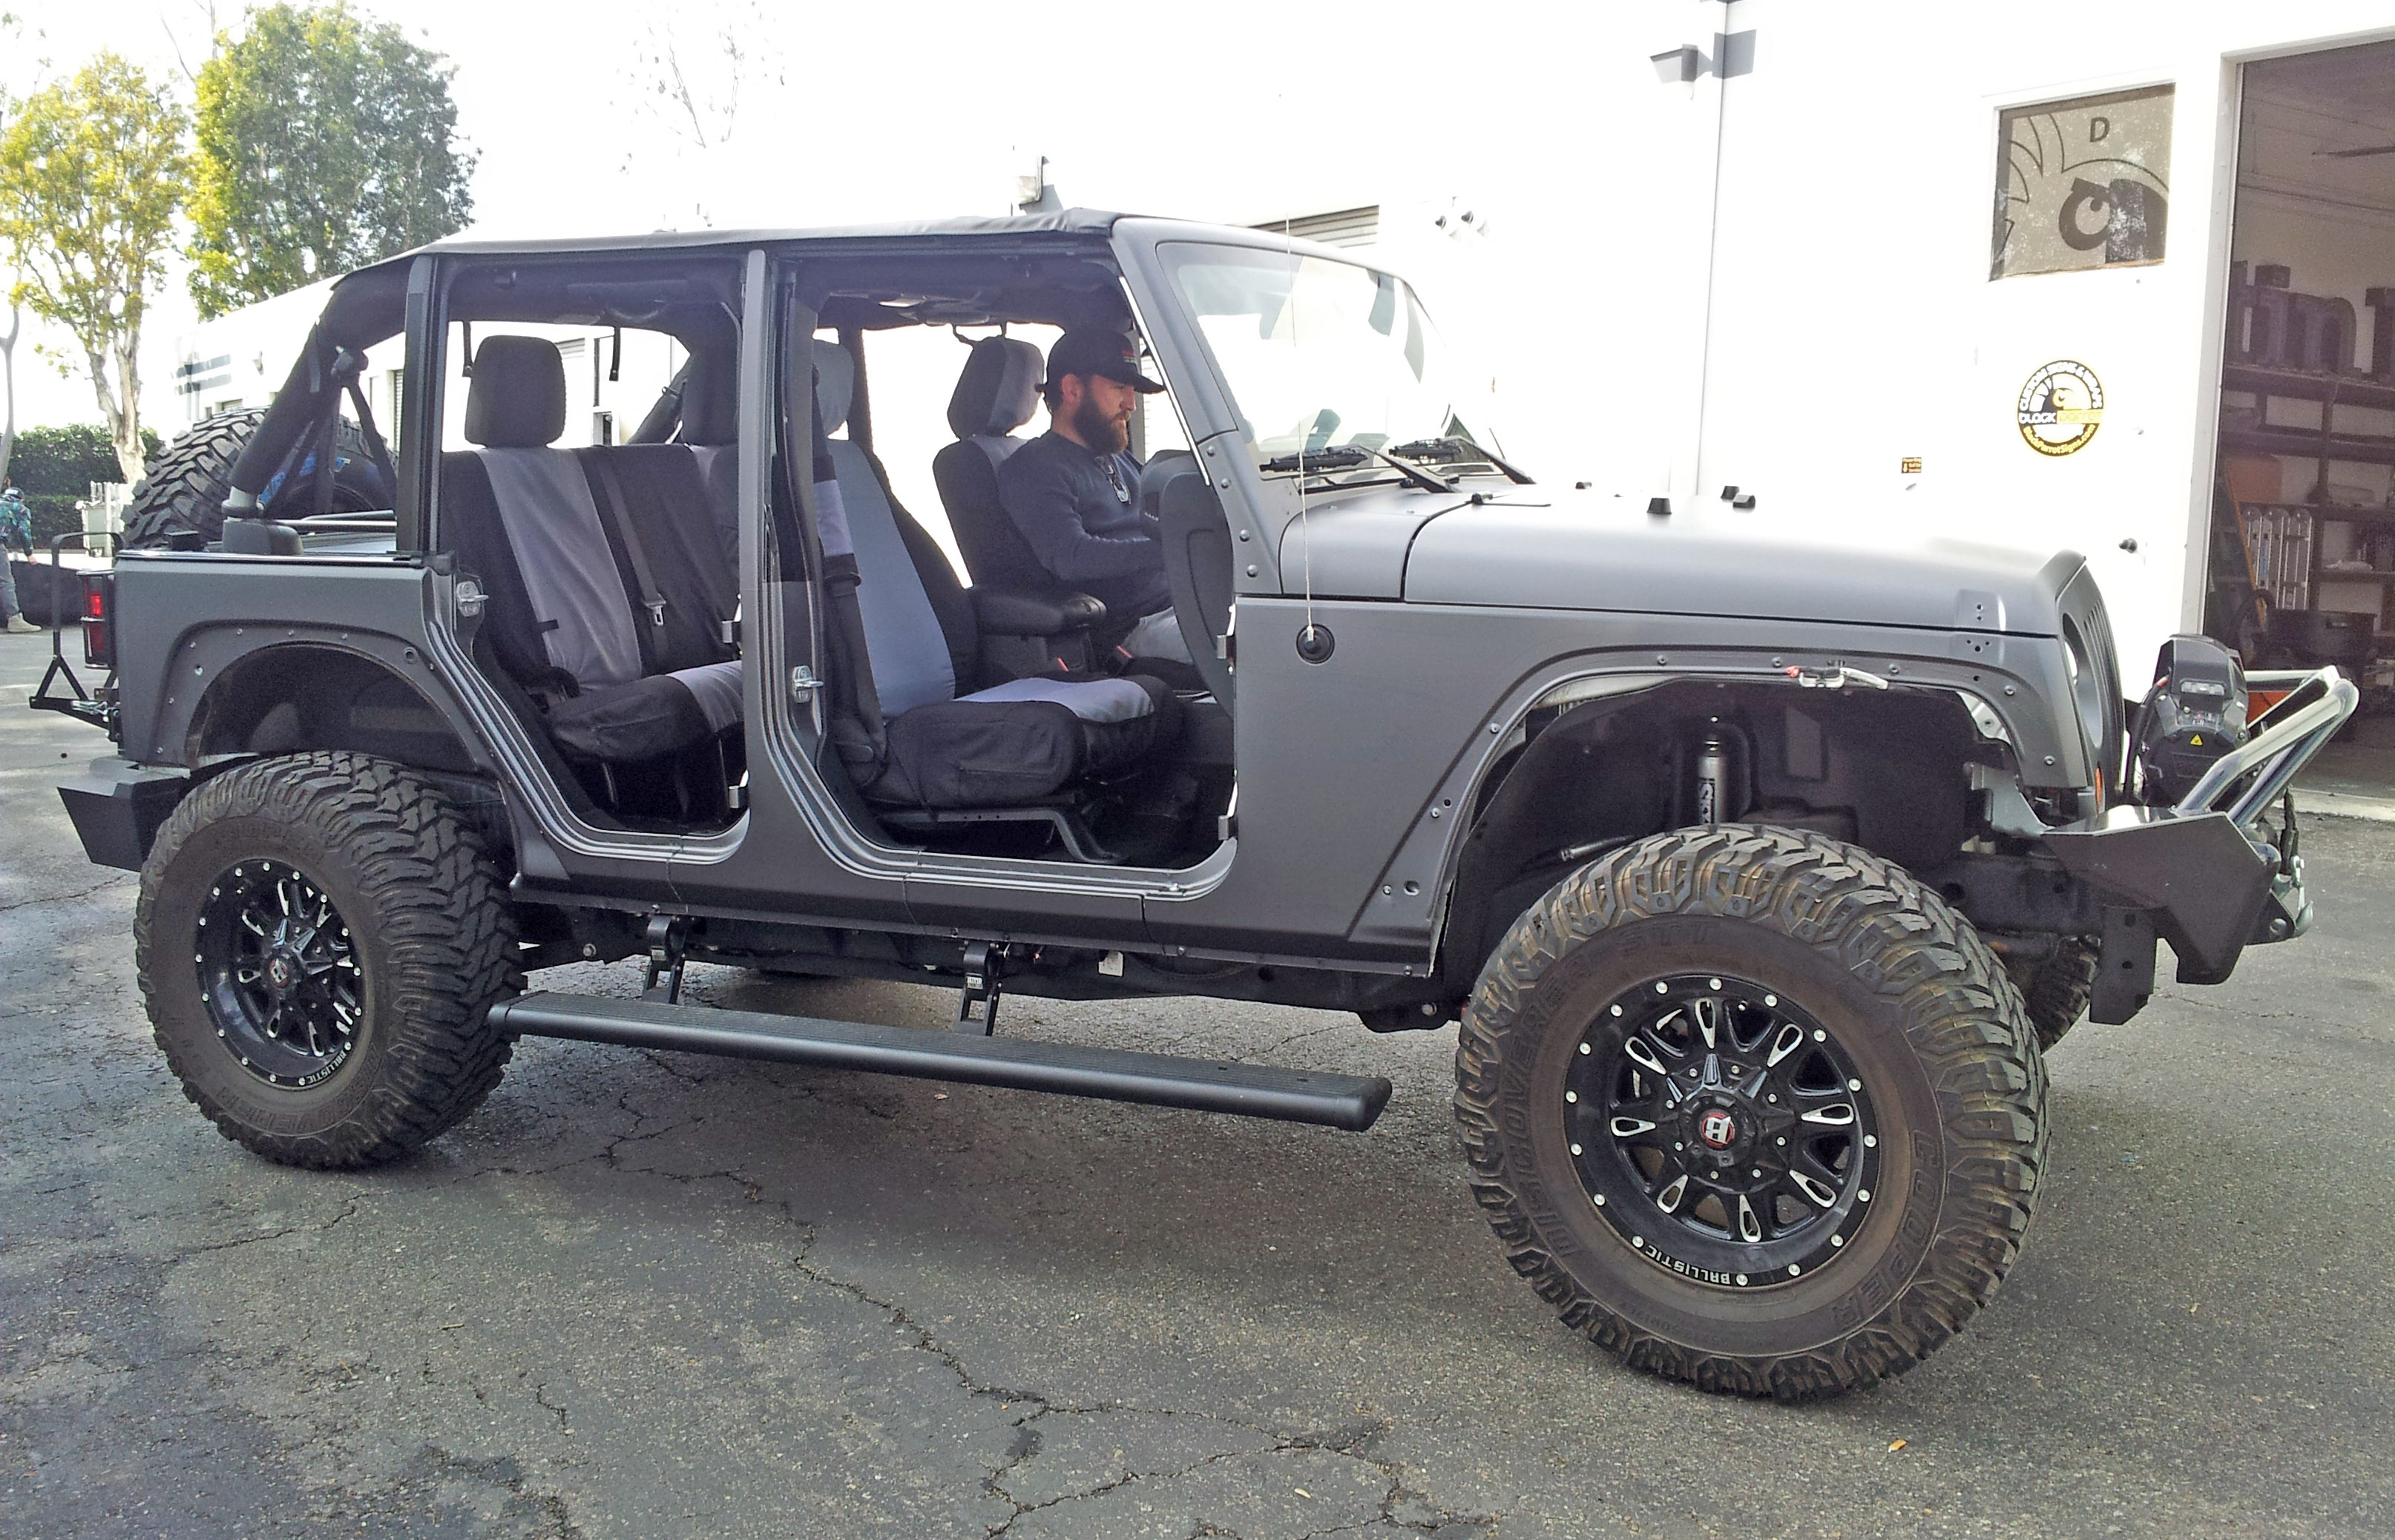 Full Vinyl Wrap on a Jeep Wrangler to Change the Color in Tustin, CA -  Tustin, CA - Signs